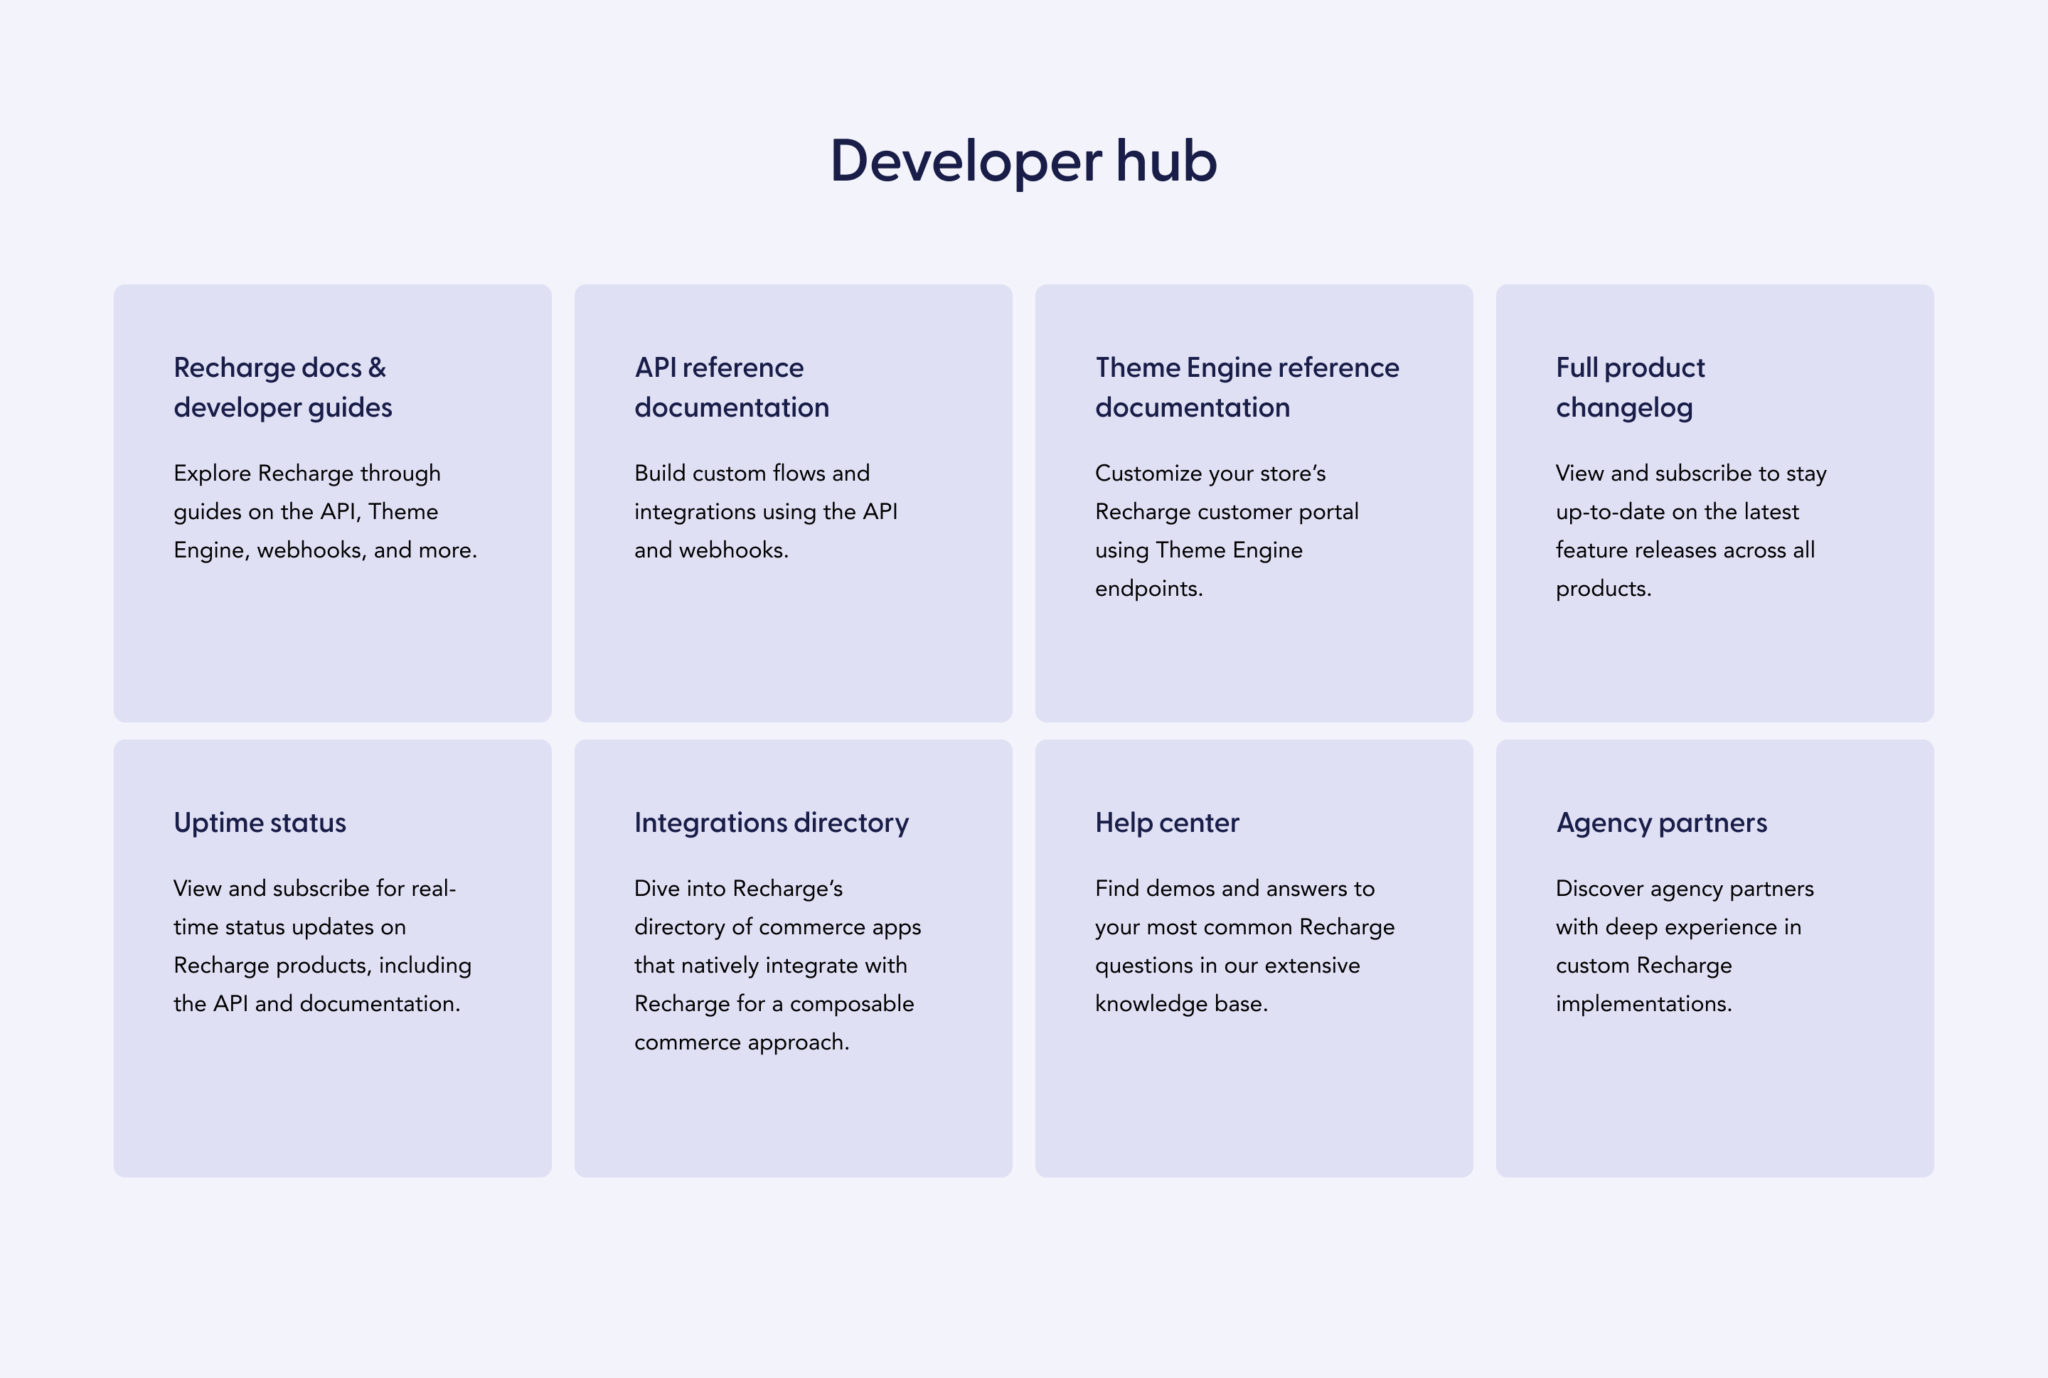 The new developer hub provides access for developers to reference documentation for the Recharge API and more.